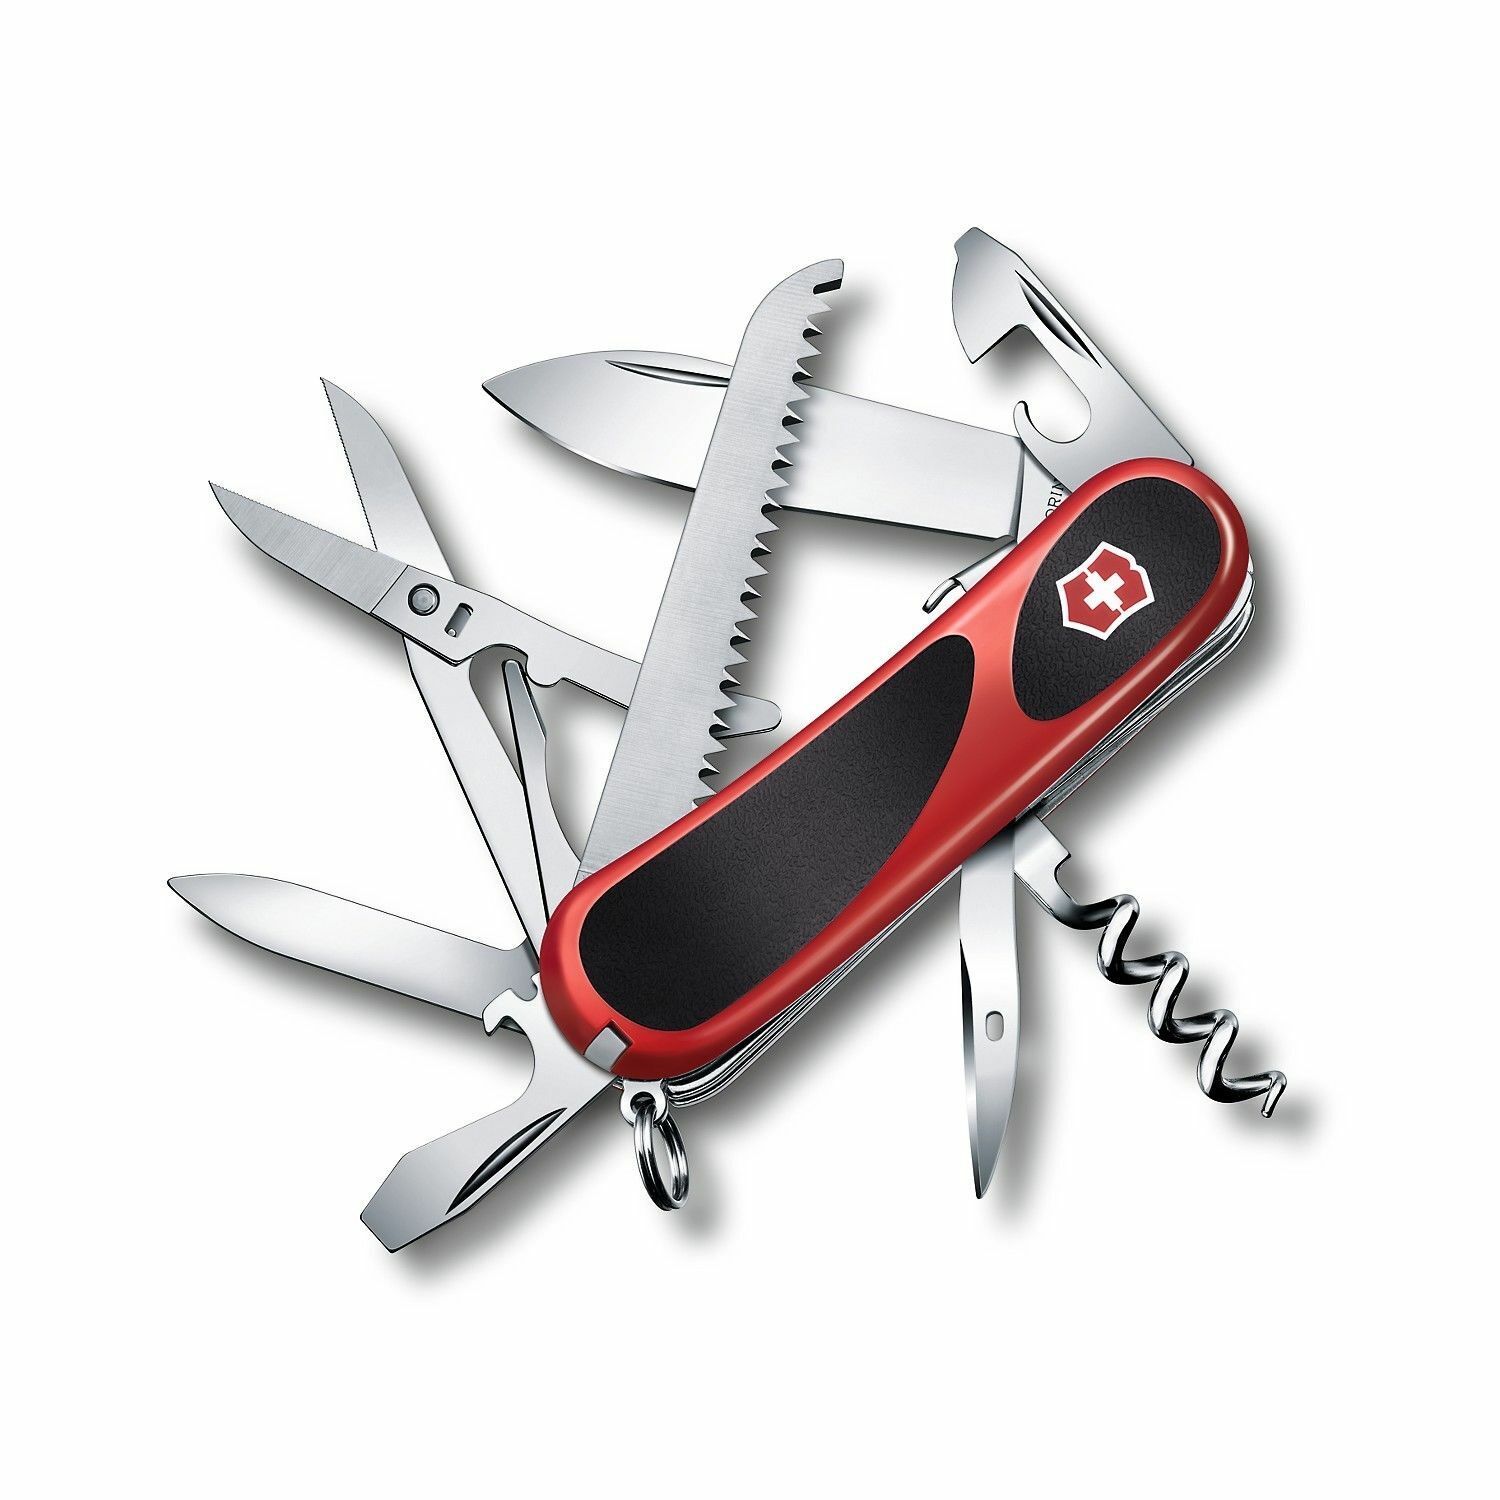 Victorinox Swiss Army Knife, EvoGrip S17 Red/Black, 2.3913.SCUS2, New In Box